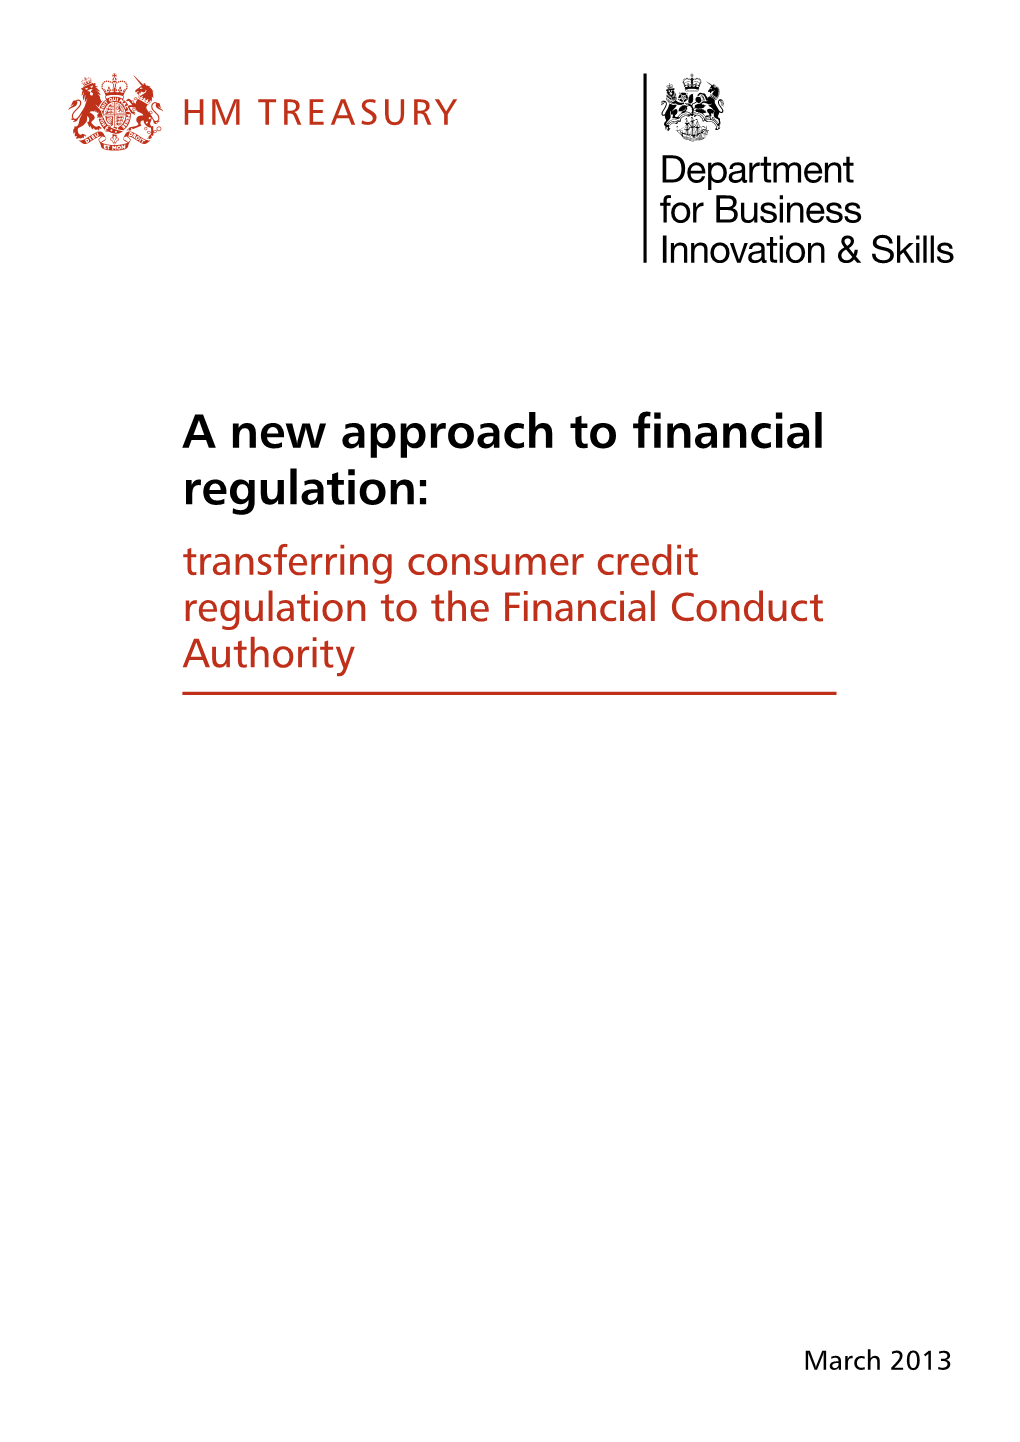 A New Approach to Financial Regulation: Transferring Consumer Credit Regulation to the Financial Conduct Authority